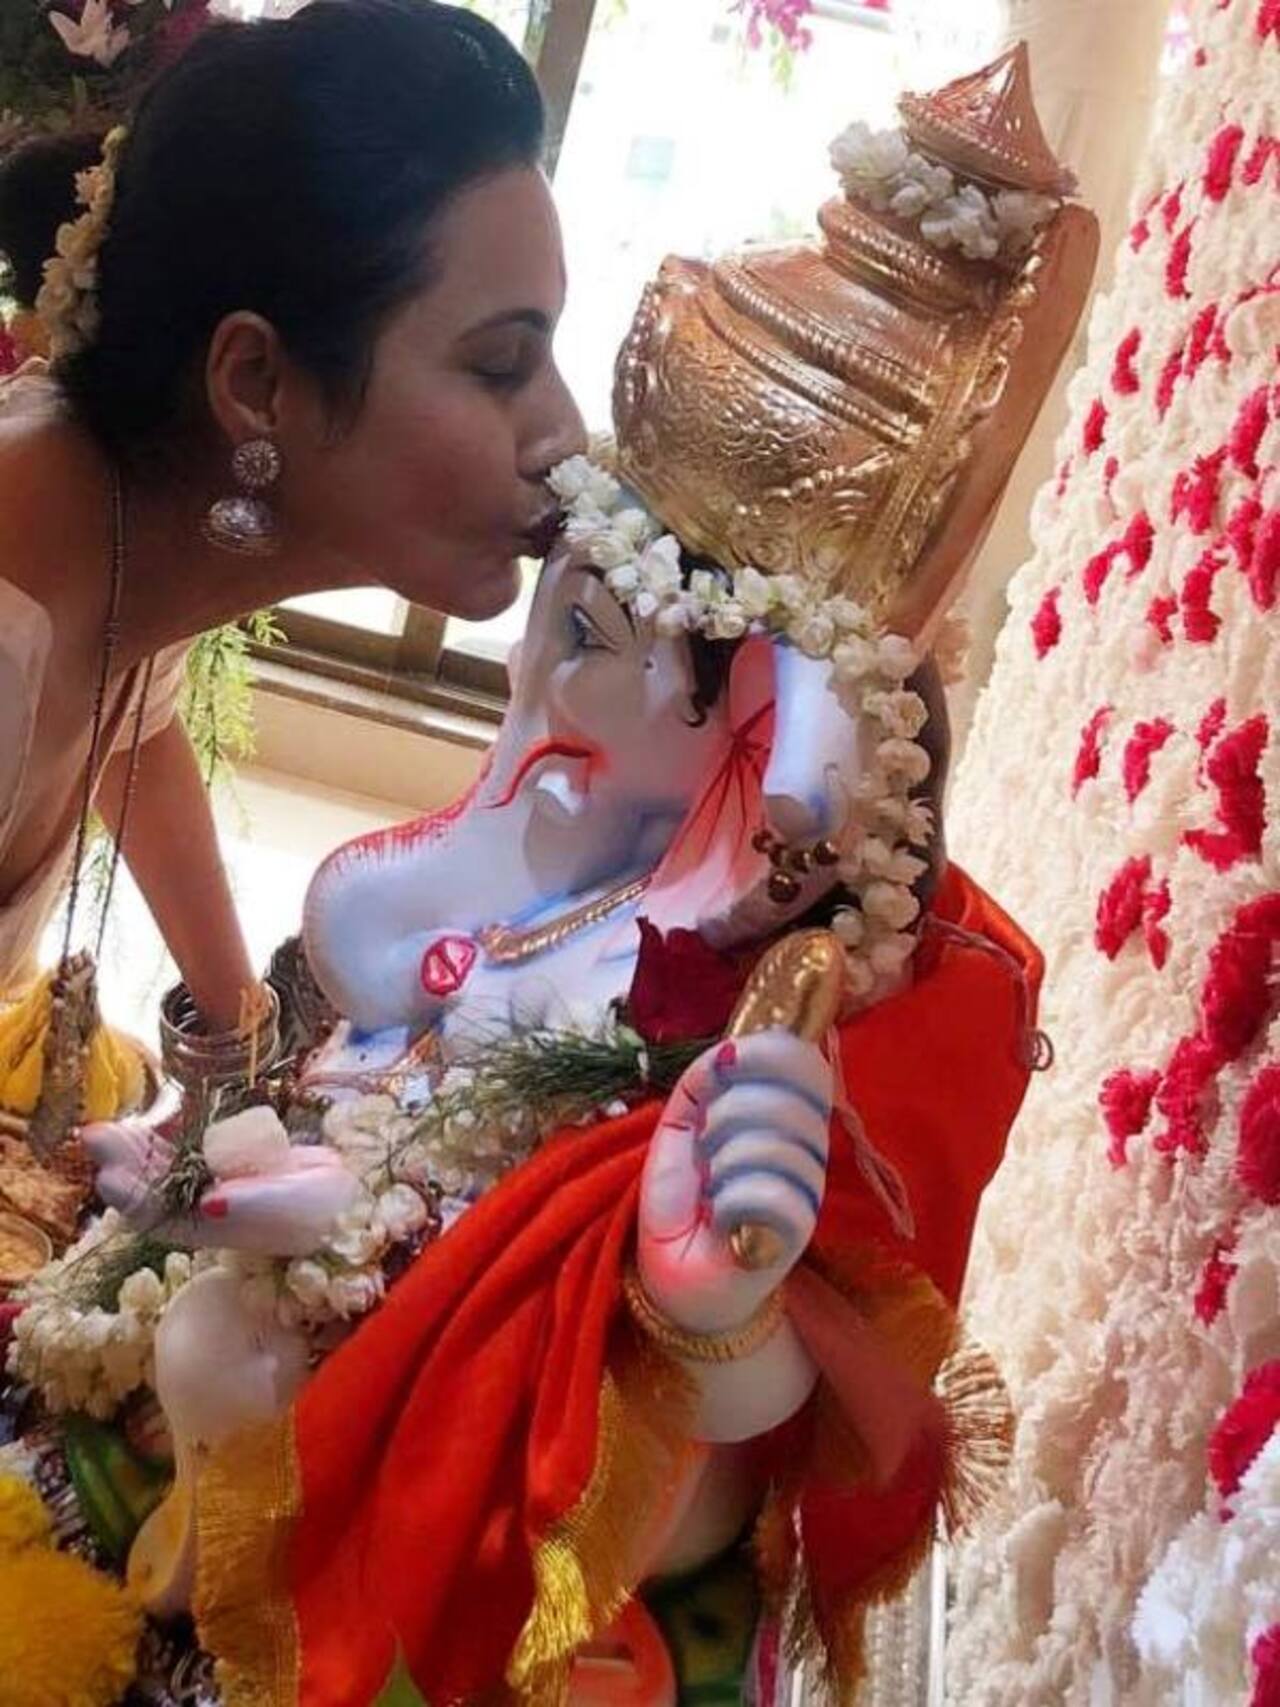 Kamya Punjabi's Ganesh Chaturthi celebration is all about colours, grandeur and devotion. The actress is a Ganpati devotee and leaves no stone unturned in making the festival memorable